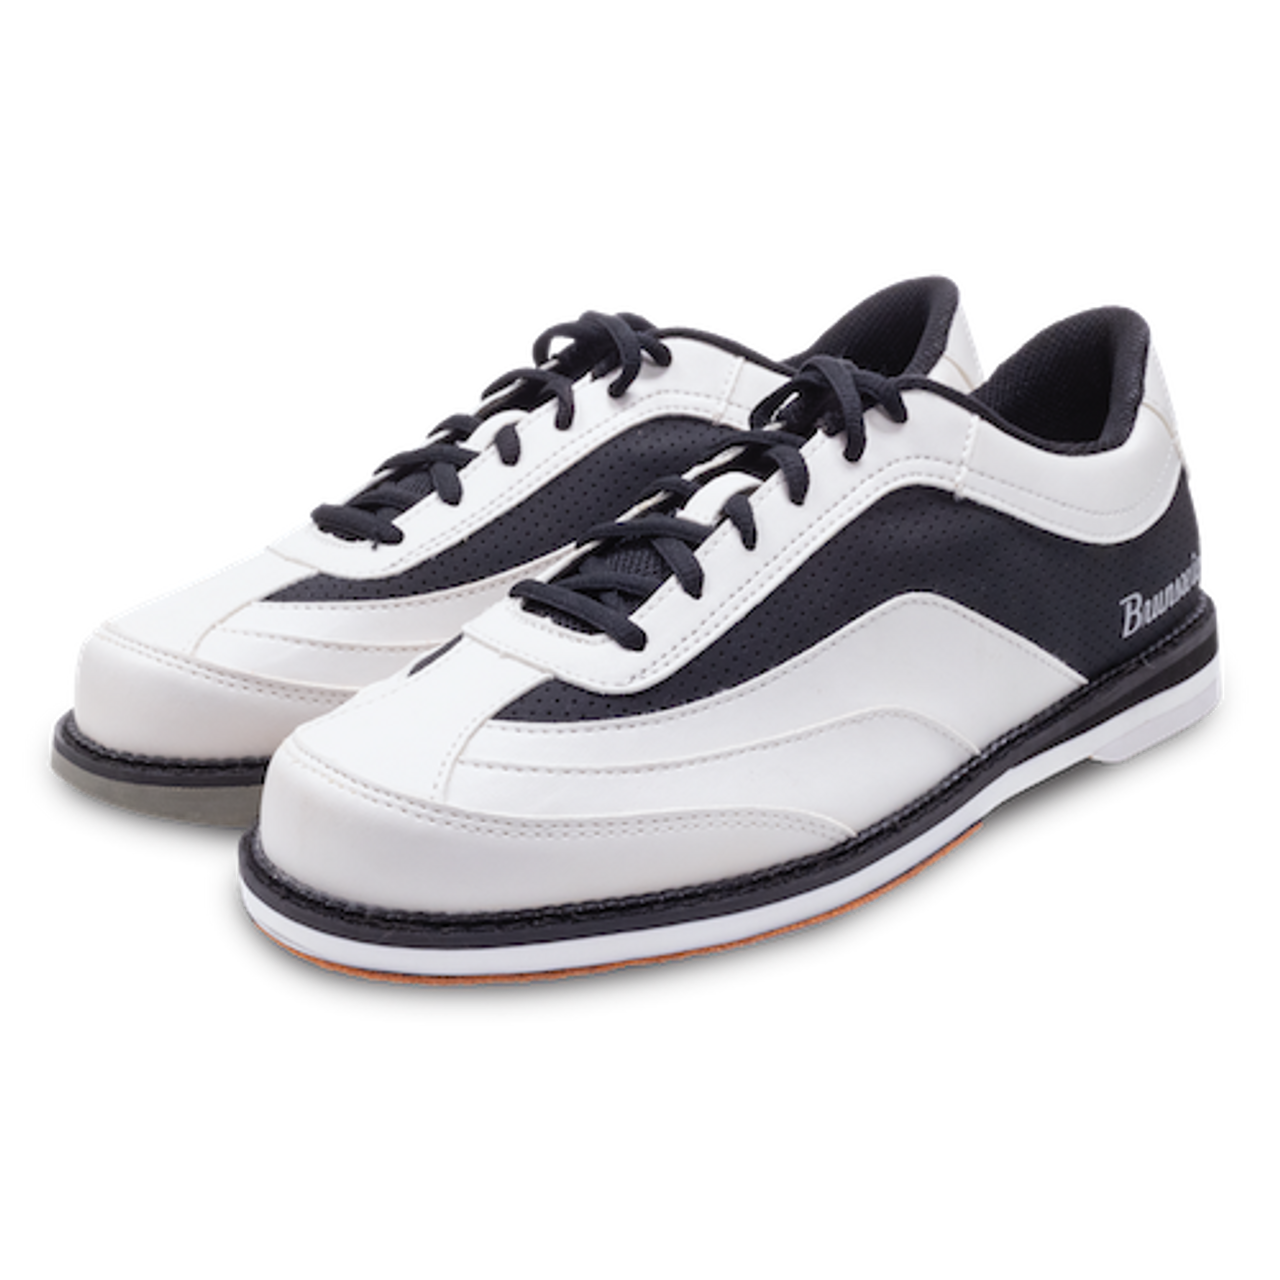 Brunswick Rampage Mens Bowling Shoes White/Black Right Hand